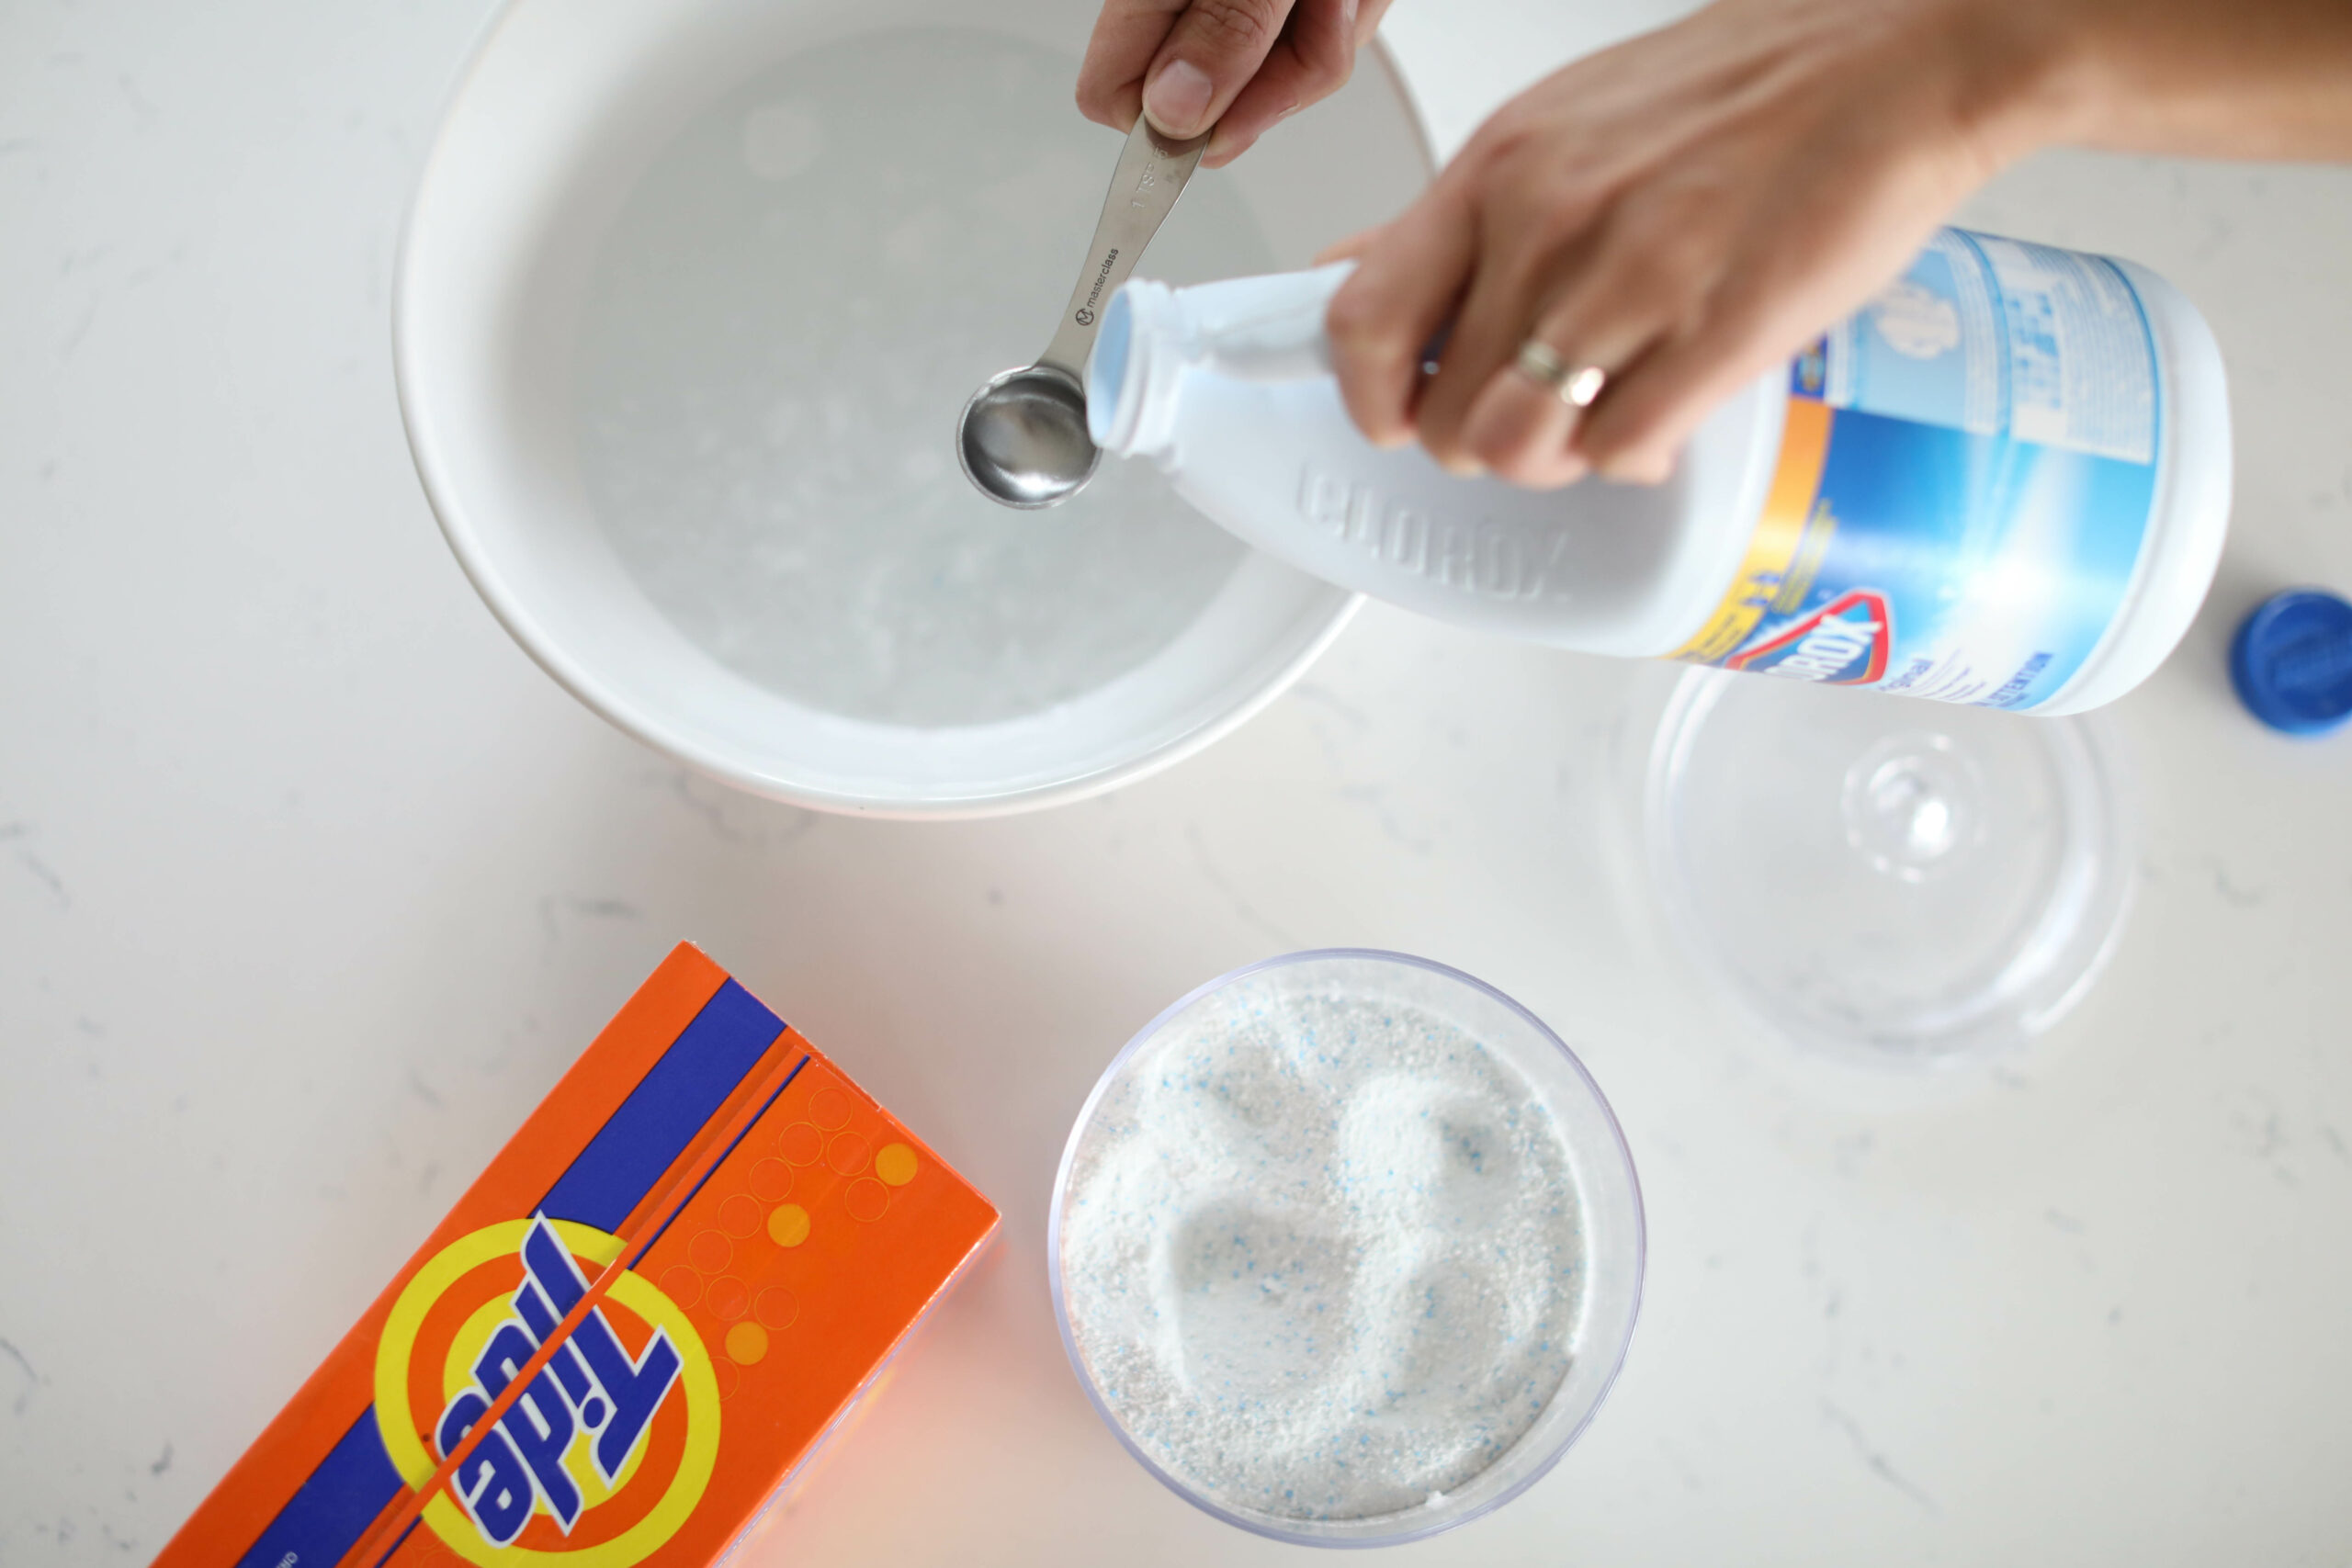 Your Guide to Cleaning With Bleach